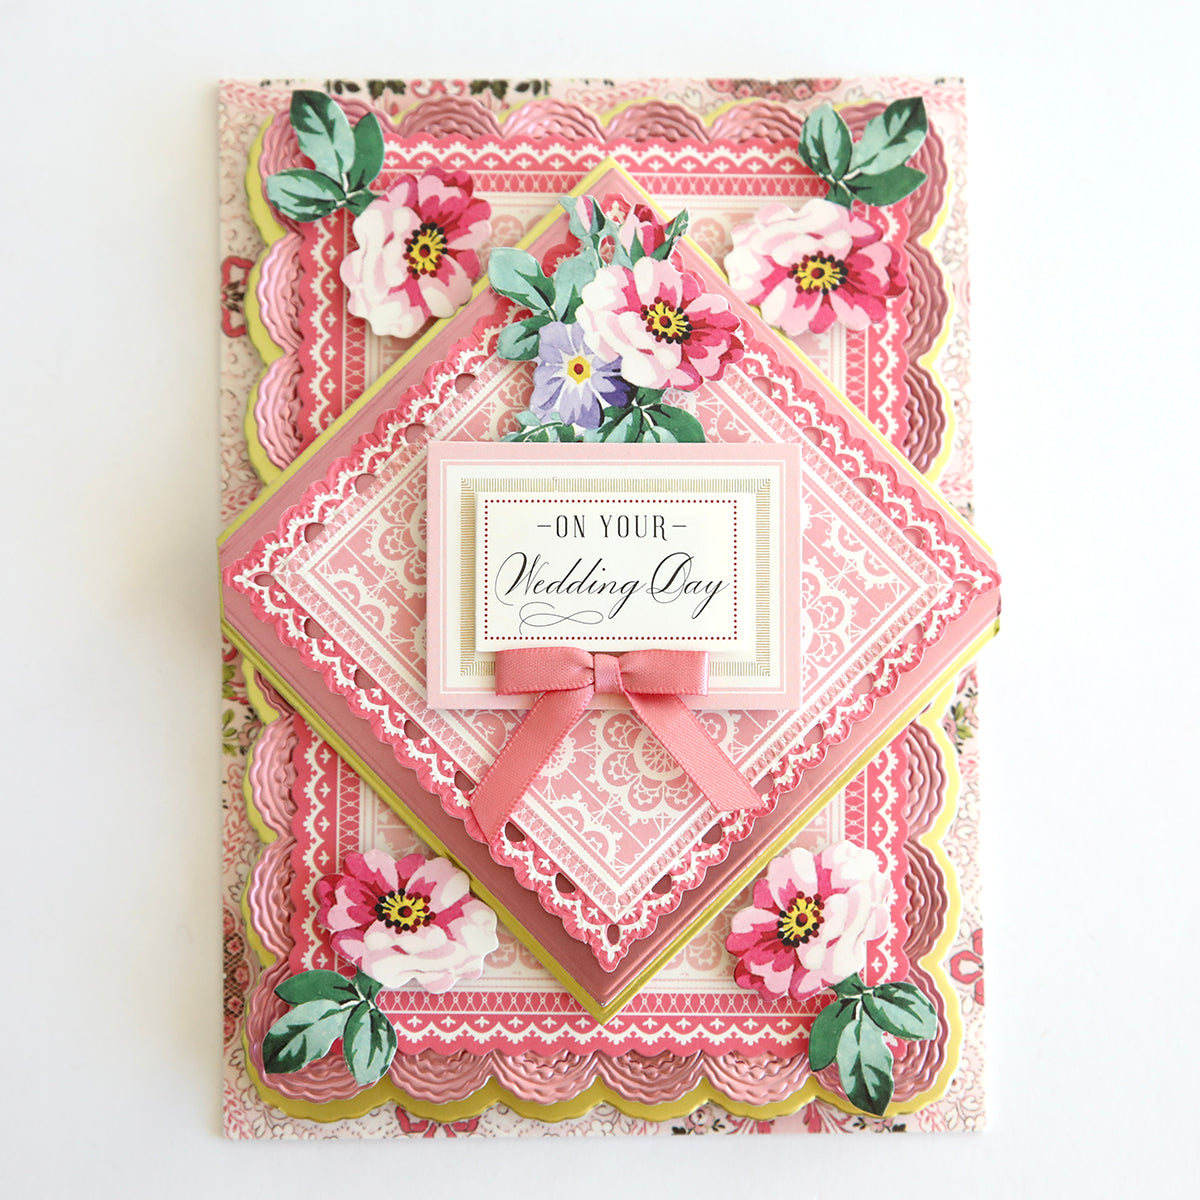 A vintage Valentine's card featuring pink and white flowers, ribbons, and Lace Doily Embellishments.